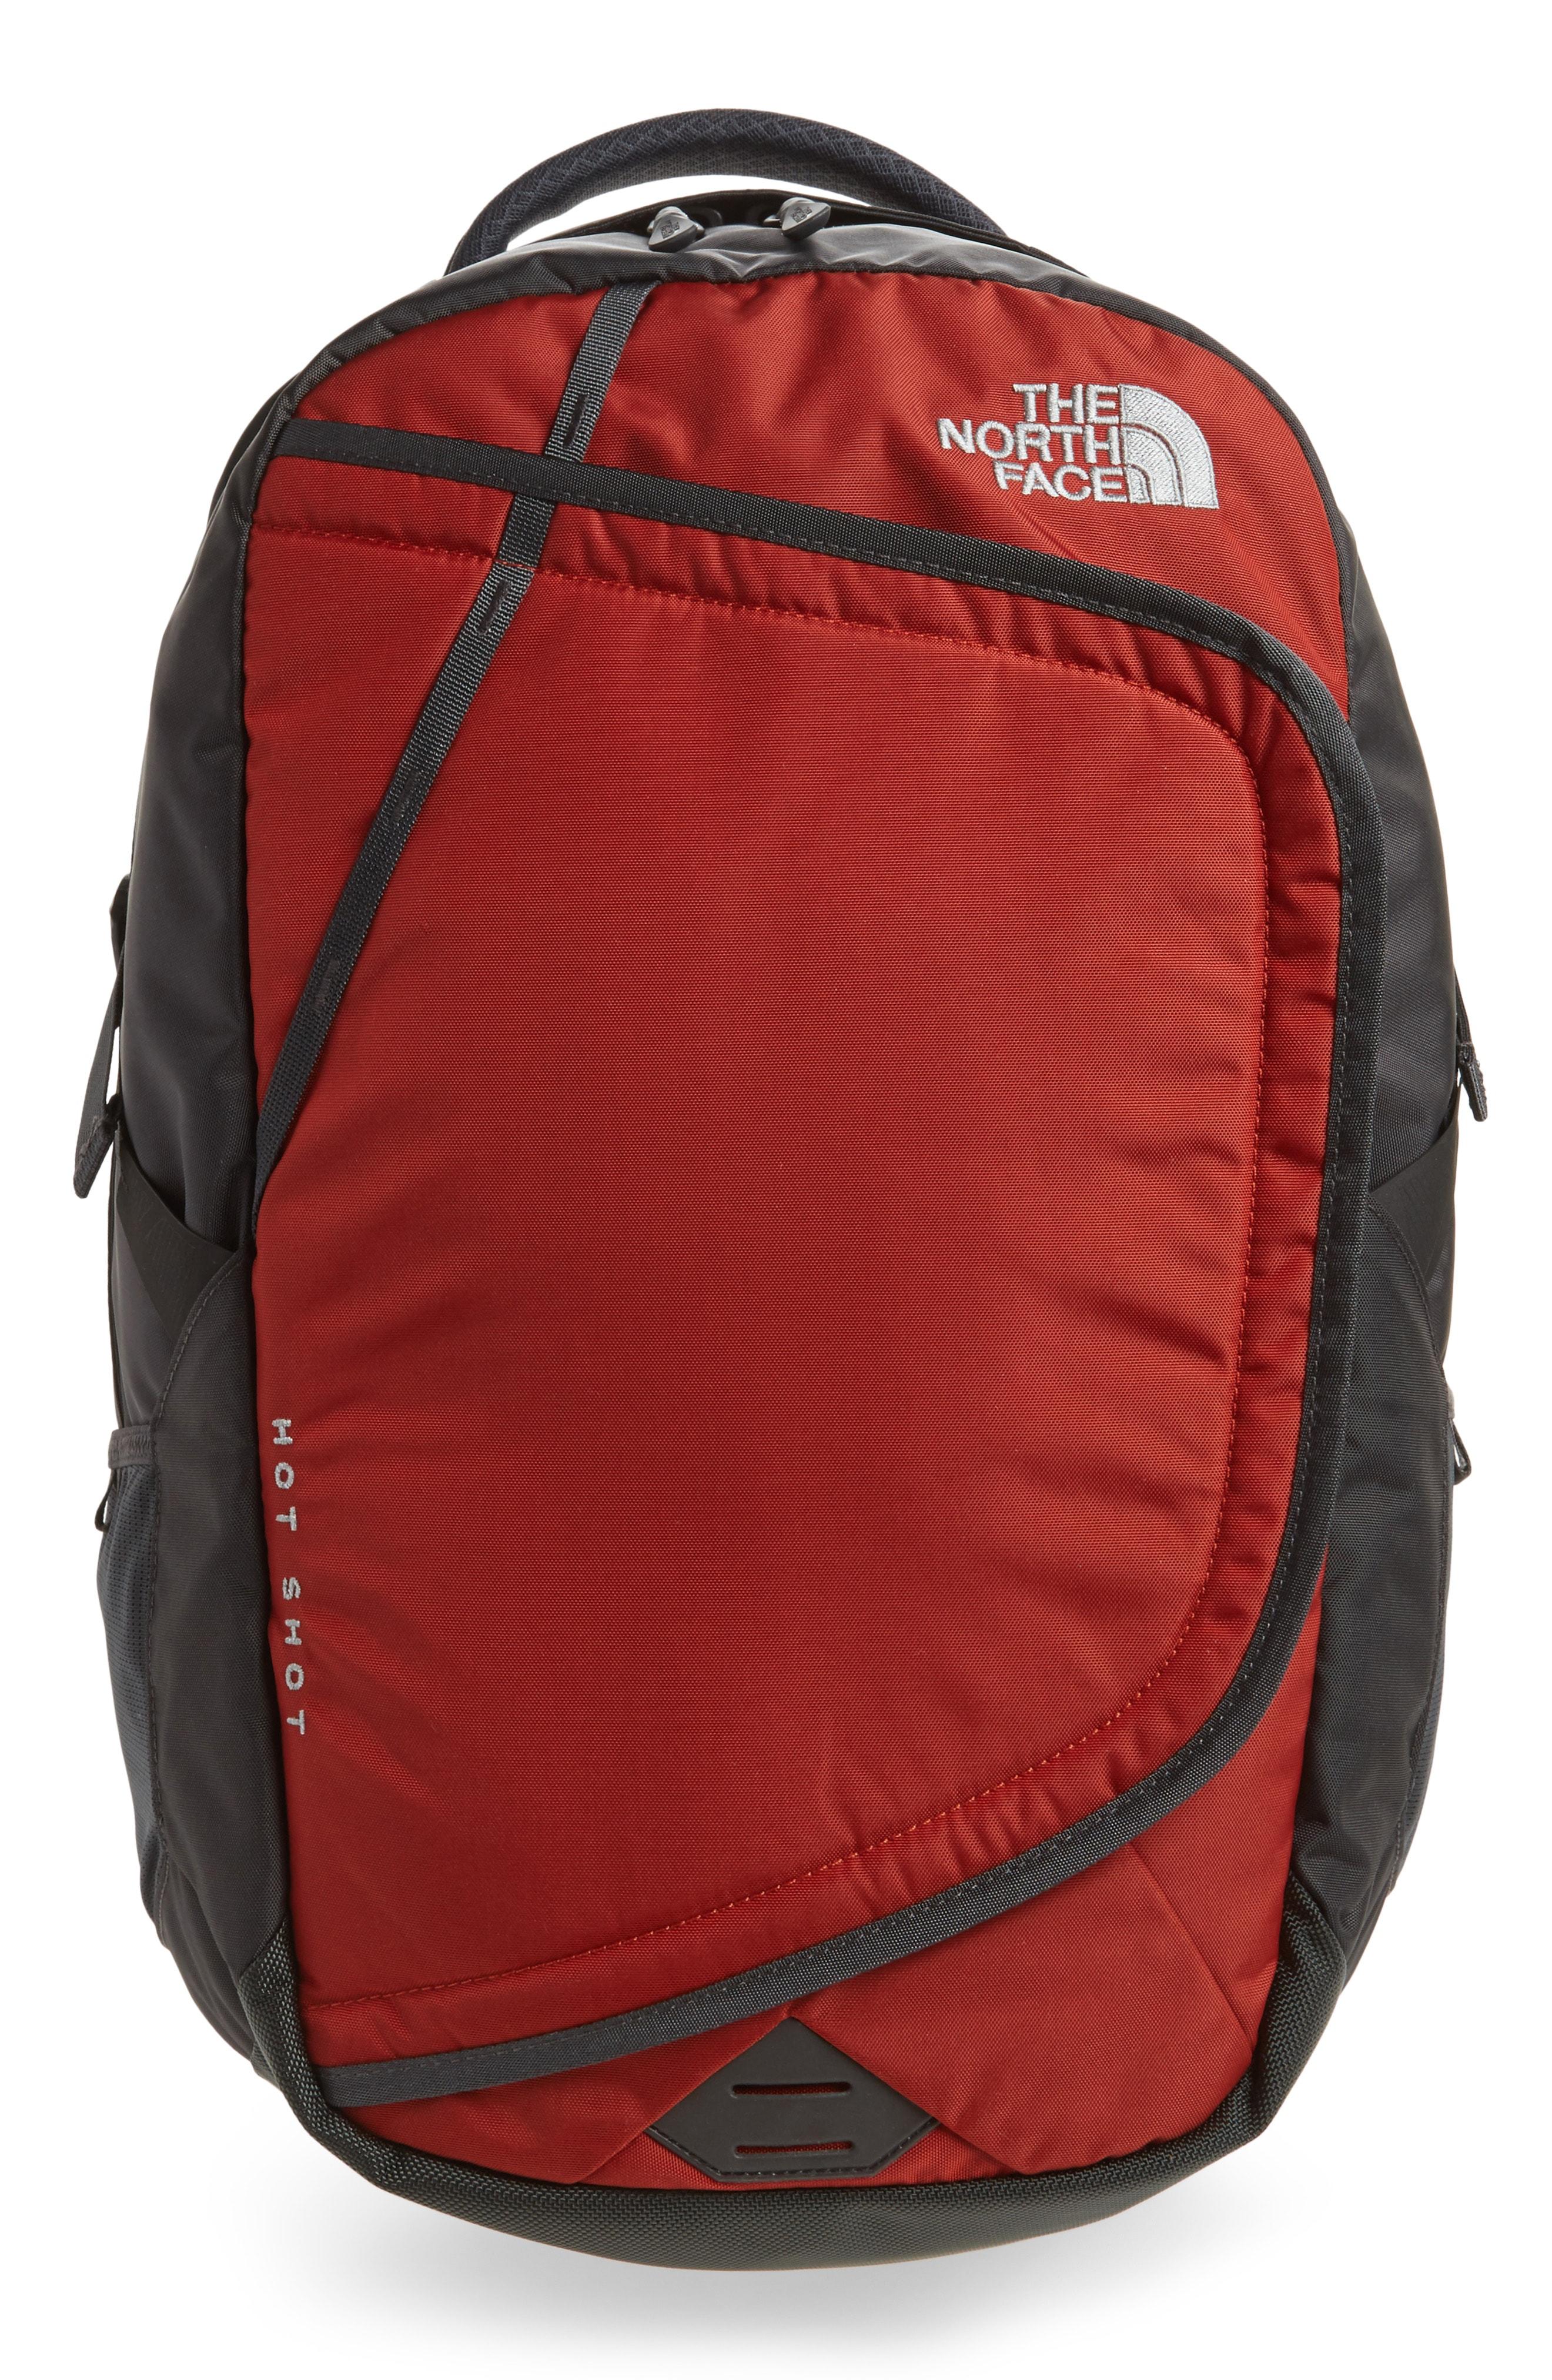 The North Face Hot Shot Backpack Red In Ketchup Red Asphalt Grey Modesens